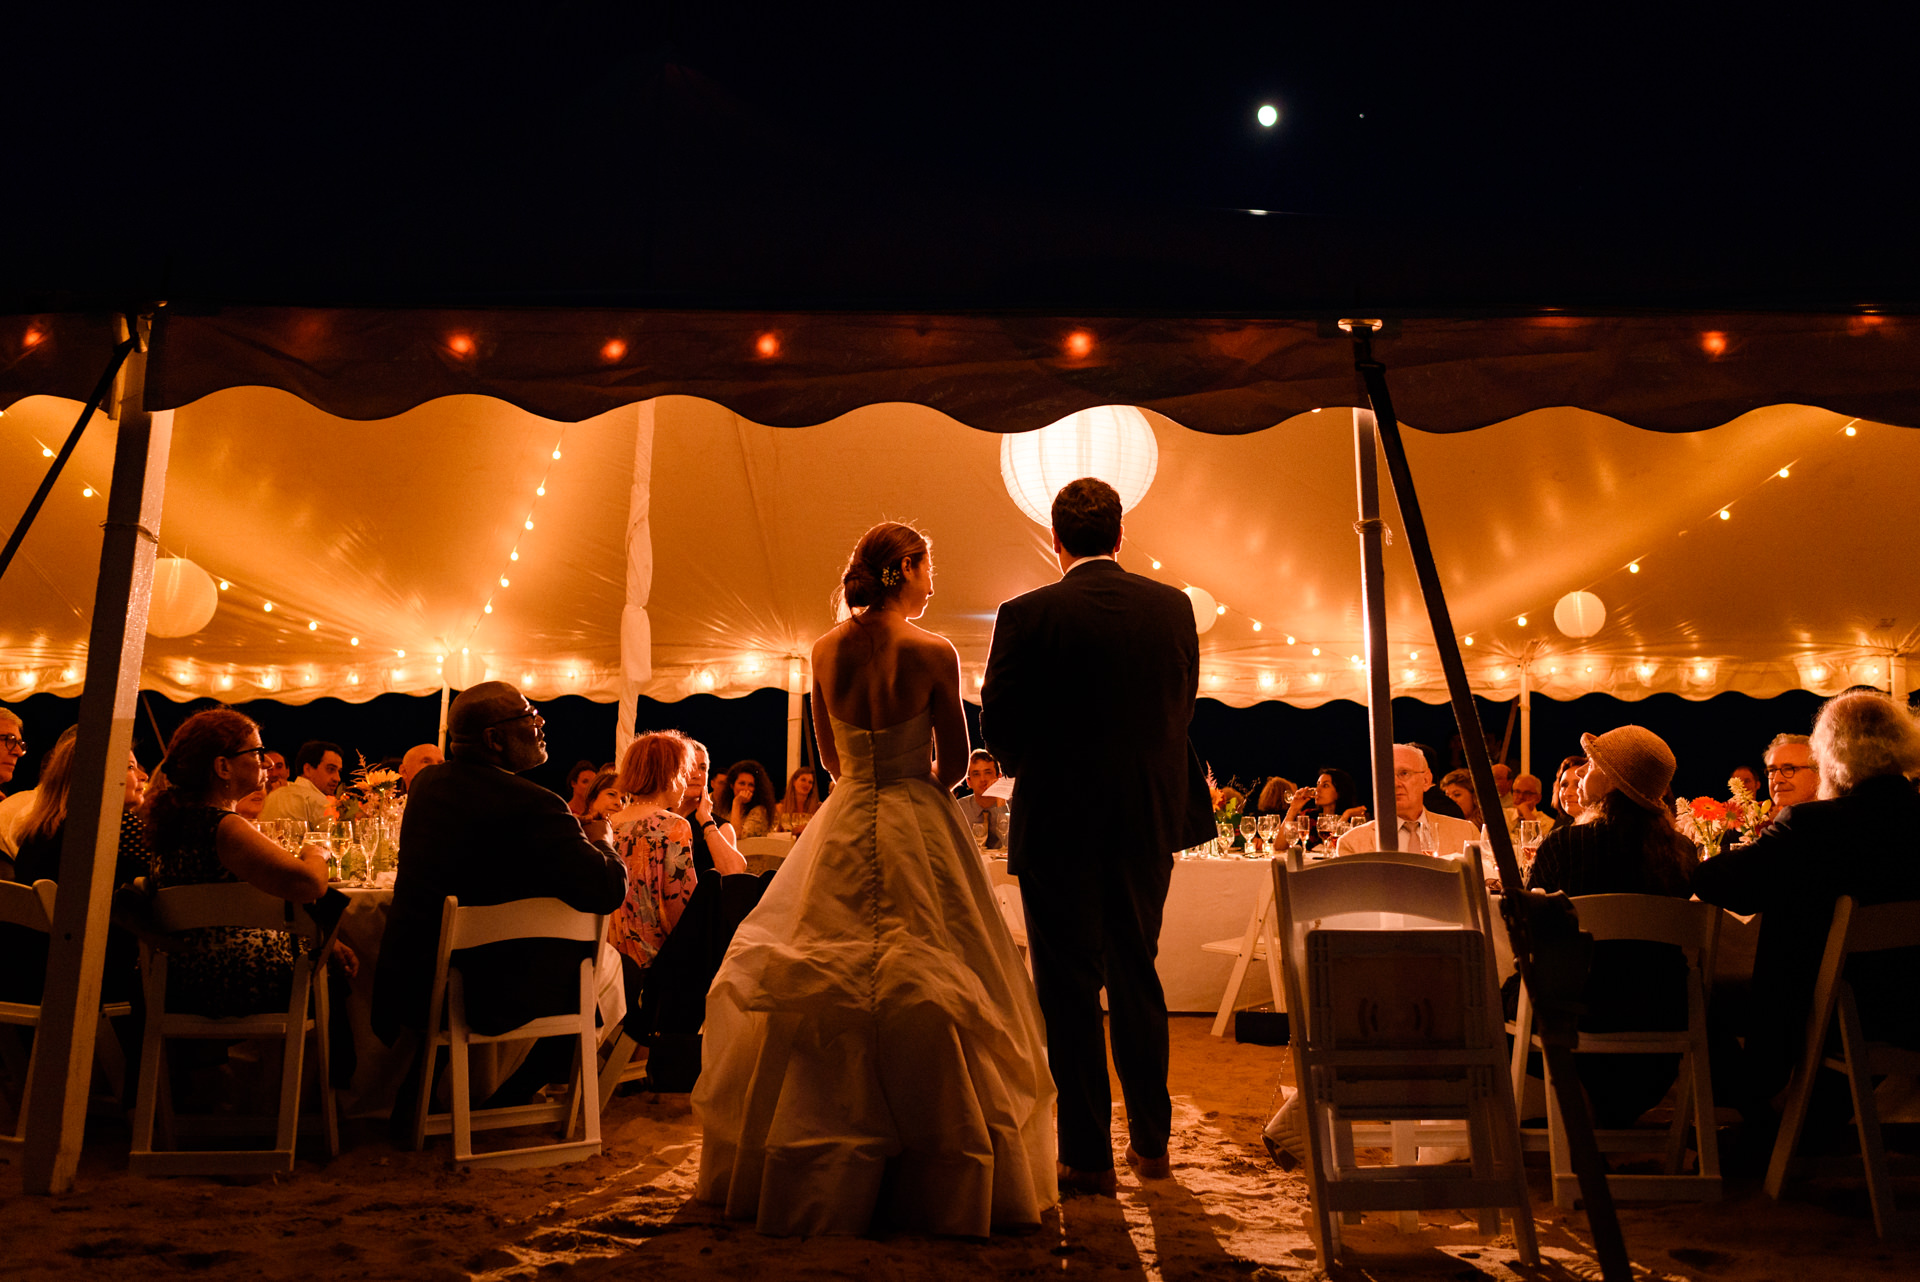 Wedding couple speaking to their guests under the warm glowing lights of a marquee tent on the beach